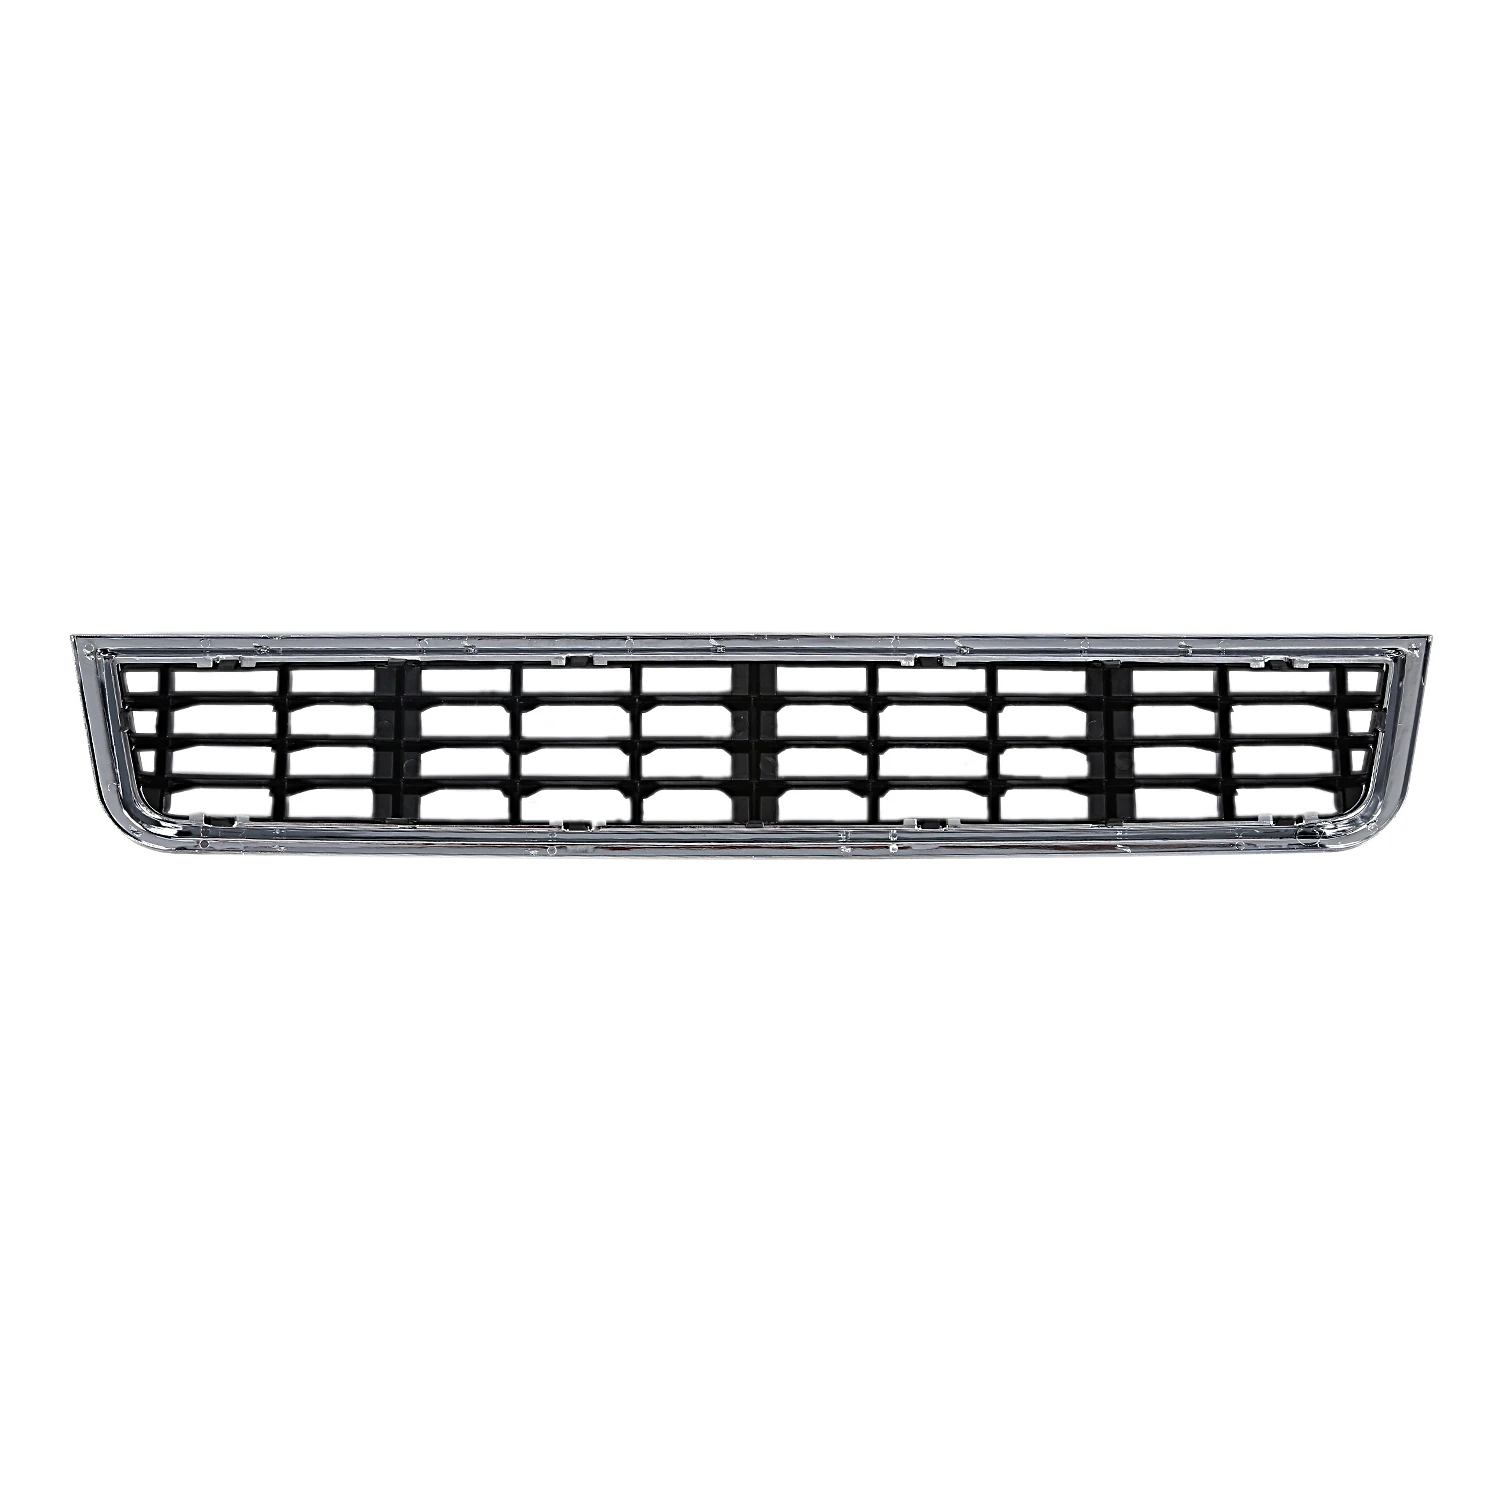 

Grille Chrome radiator grille Front bumper center for Audi A4 B6 Limousine 02-05